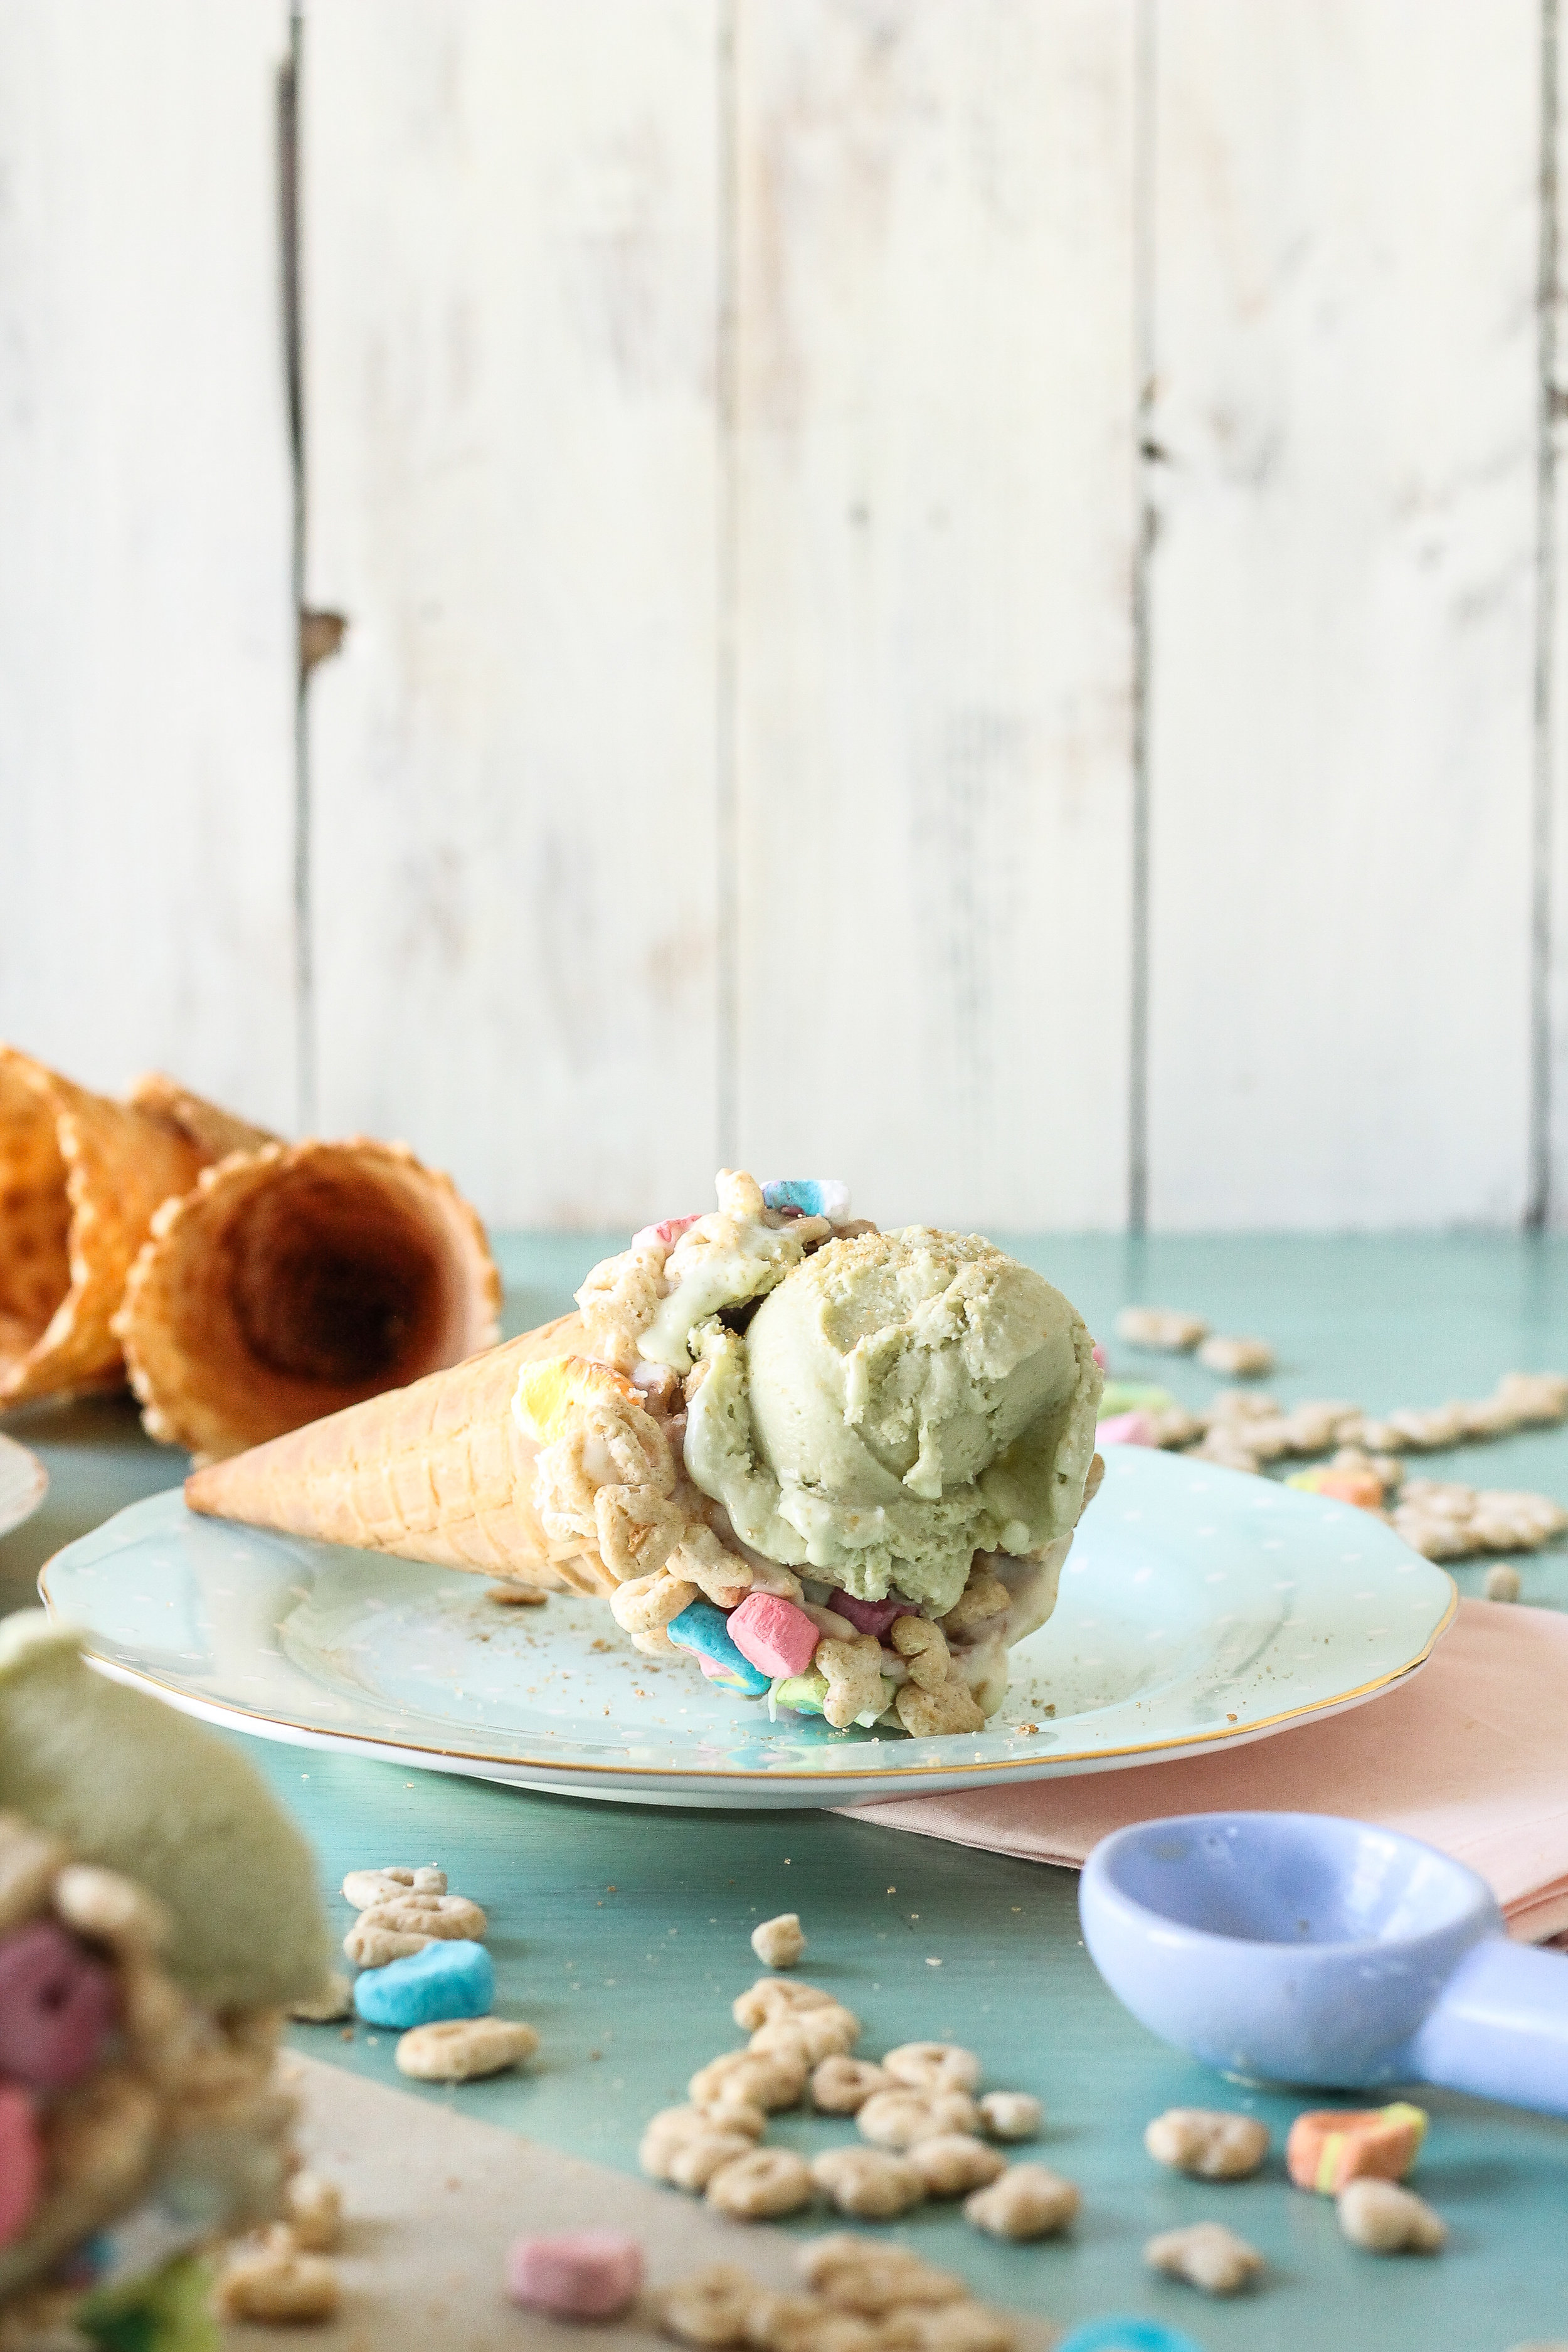 Saint Patrick's Day is looking prettier than ever with this Lucky Charms Ice Cream!  Find the recipe and many more on www.pedanticfoodie.com!!